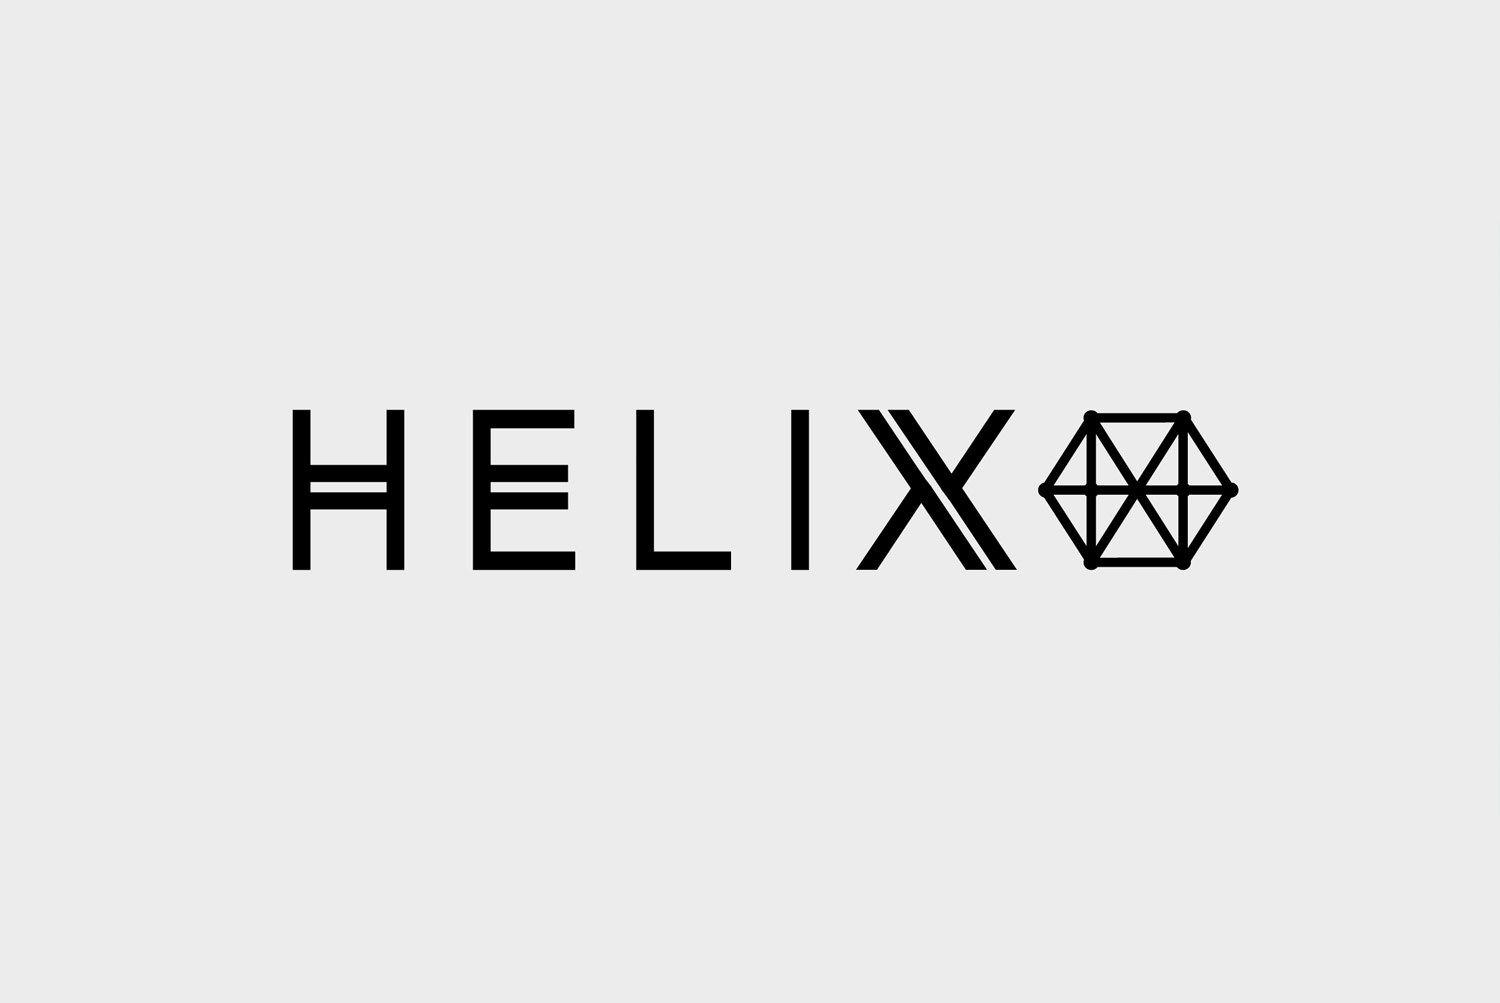 Helix Logo - Helix: logo design, branding and strategy for startup brand | Middle ...